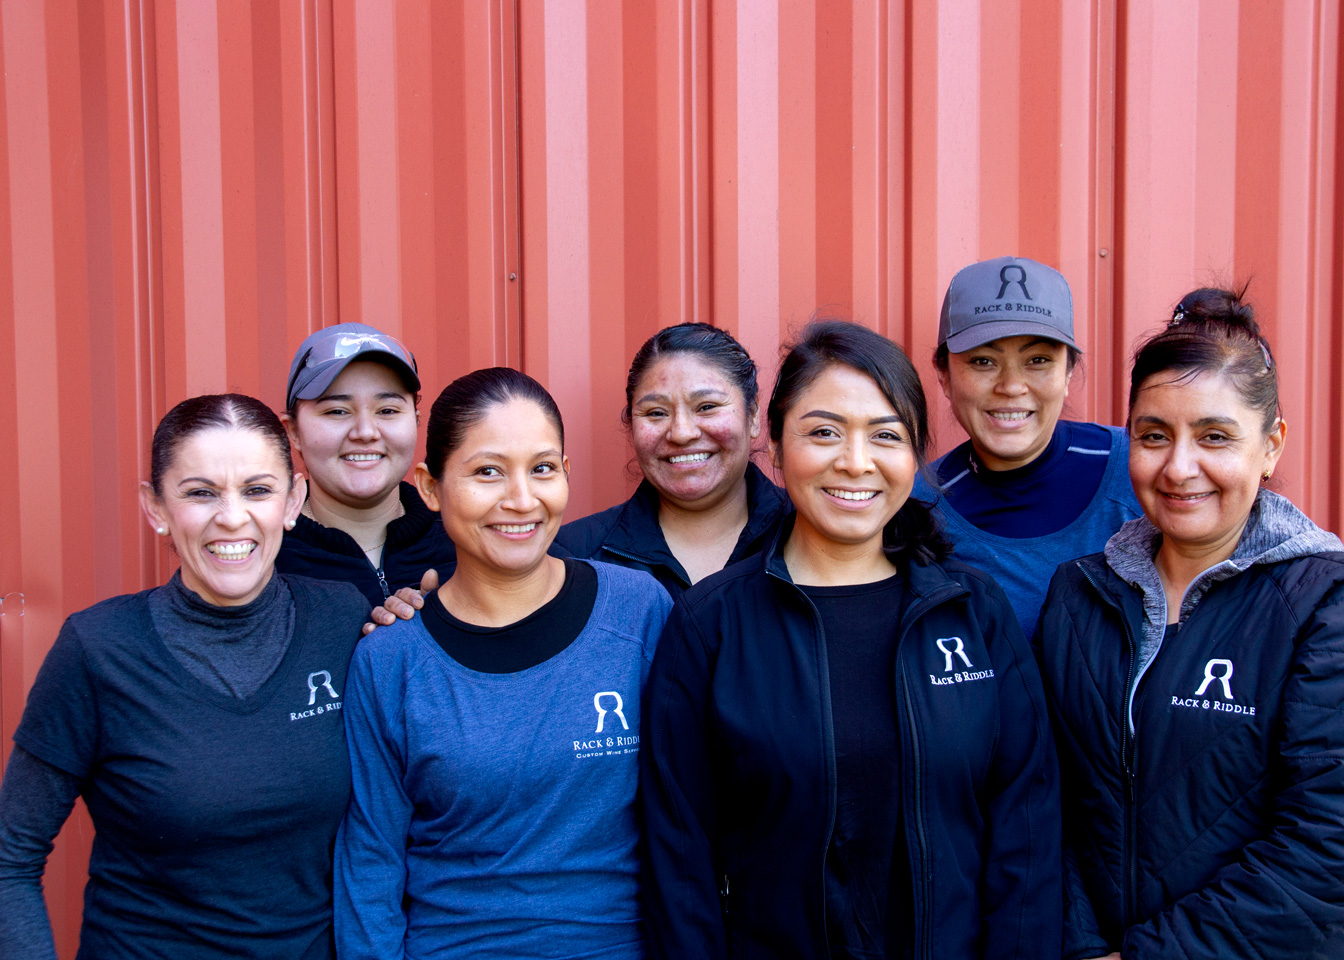 Group photo of the women who work on the production line at Rack and Riddle